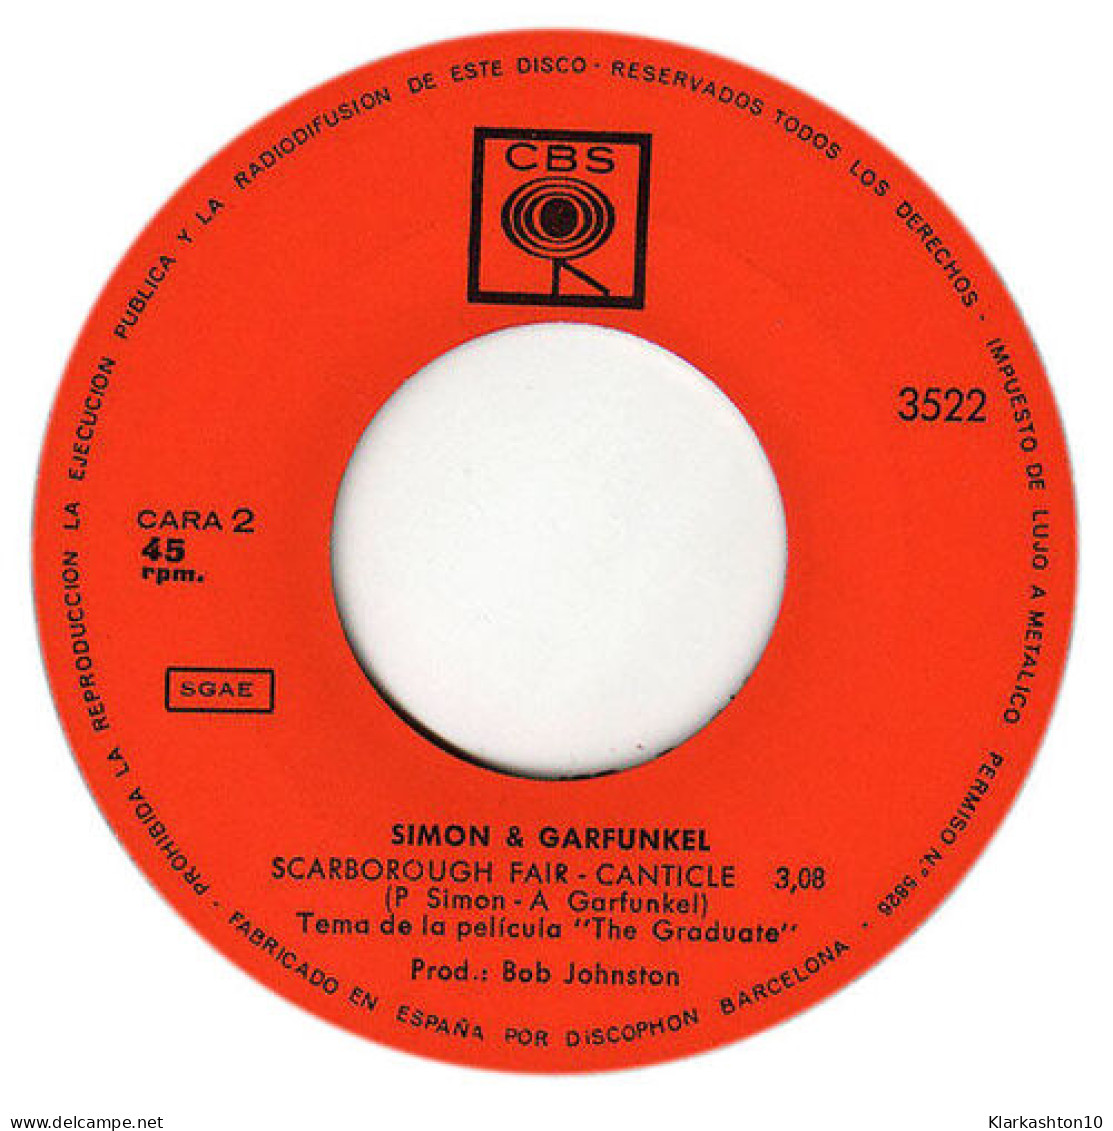 Mrs. Robinson - Scarborough Fair/Canticle - Unclassified